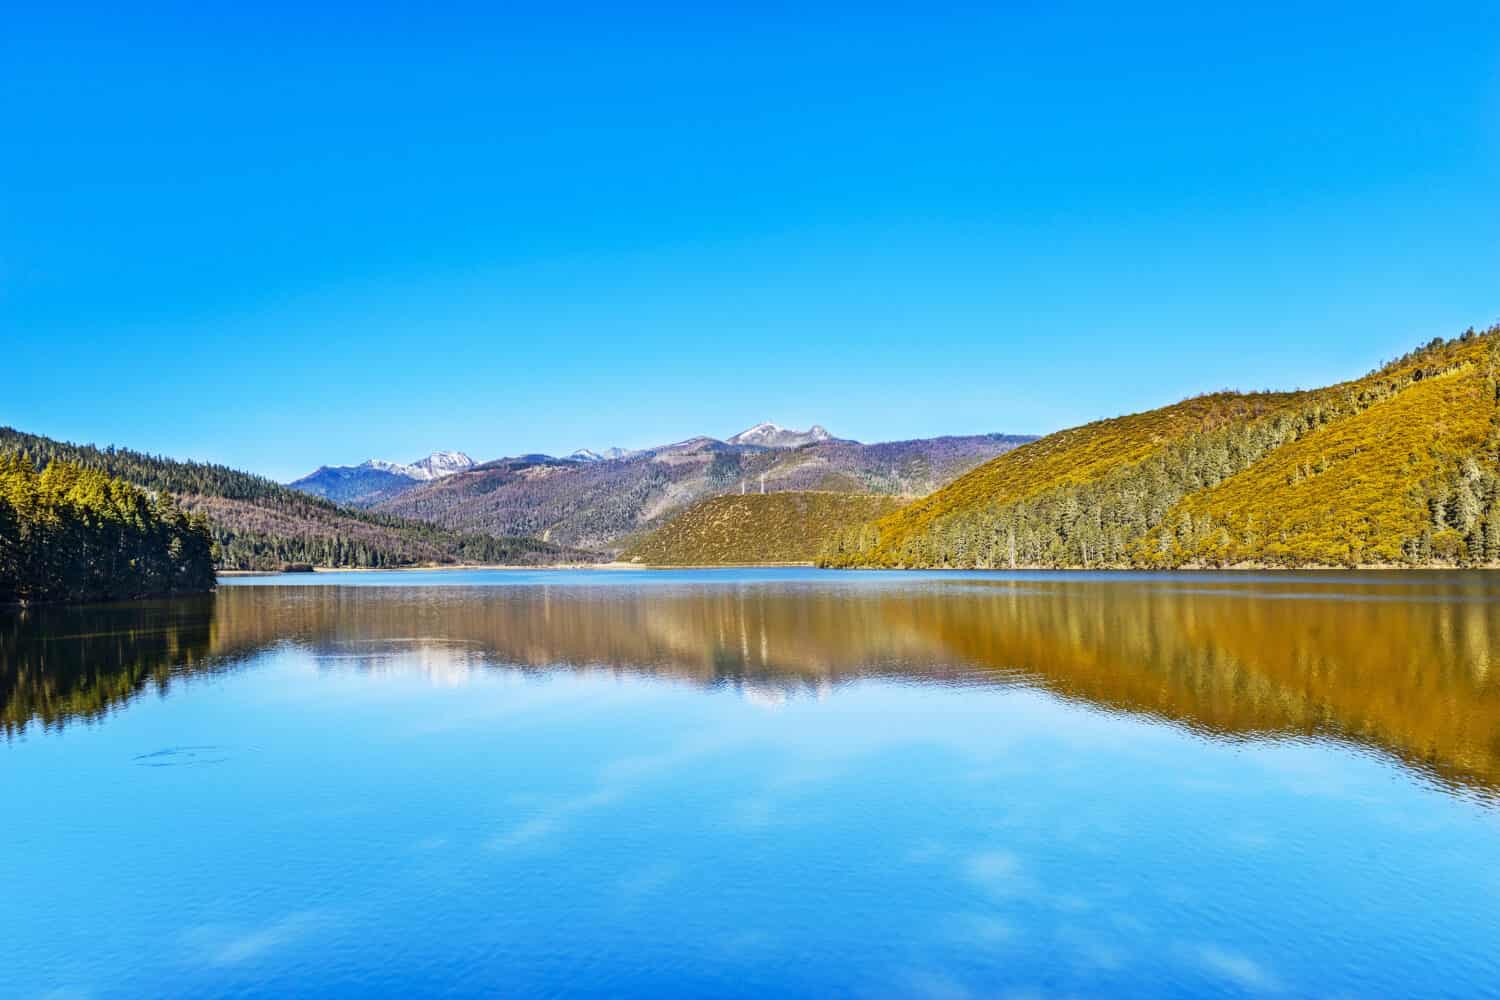 Landscape of Shangri-La in early spring, Shudu Hai Lake. Pudacuo National Park. It is a national park located in Shangri-La, Yunnan Province, China.